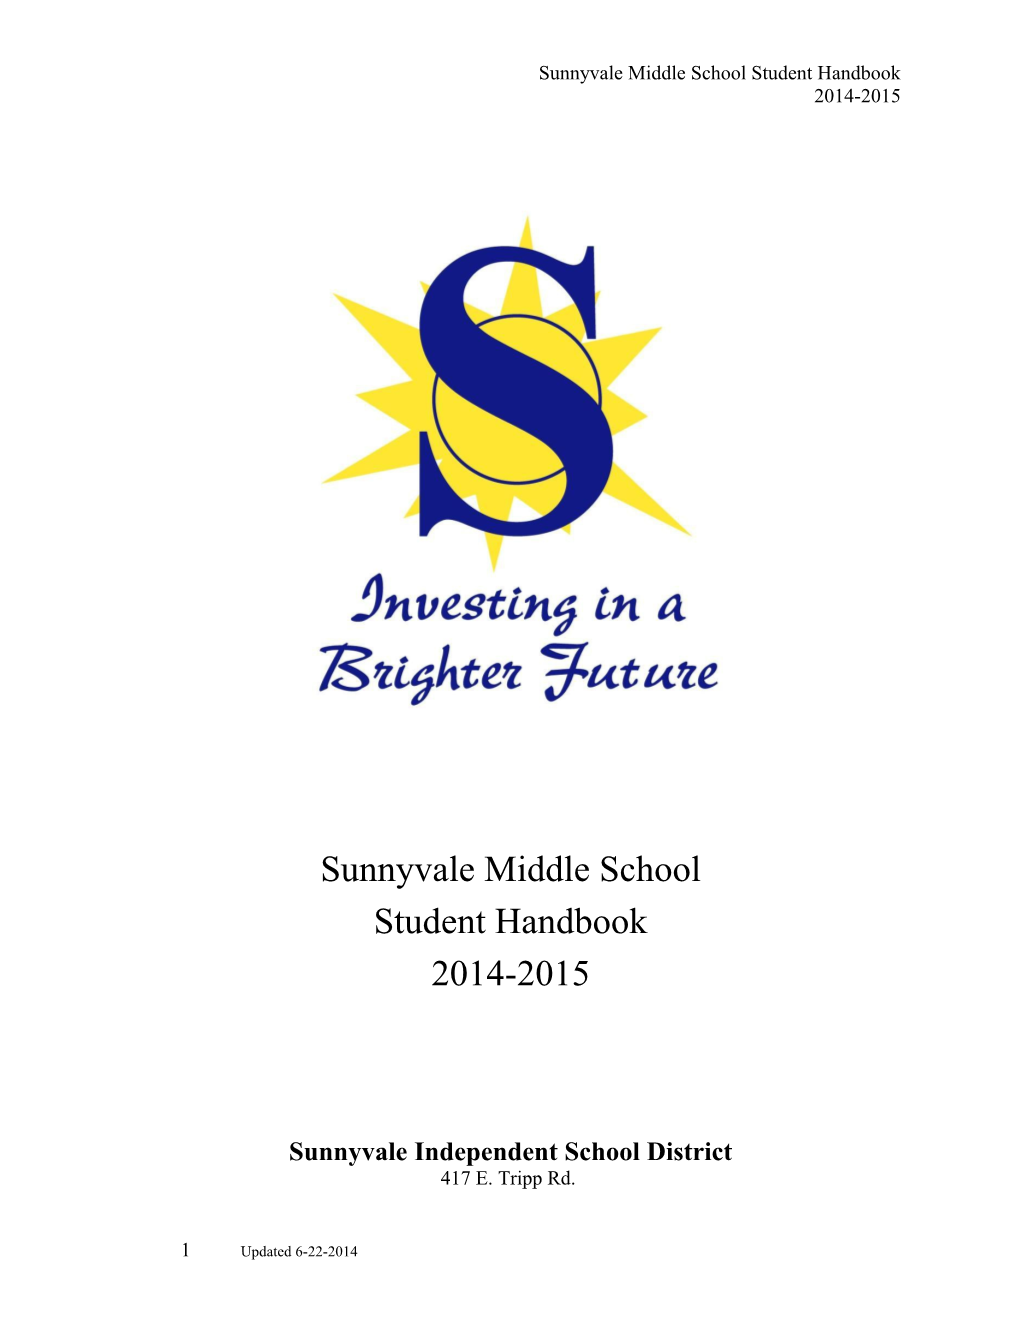 Copy Of SMS Student Handbook 2014-2015-Updated 8-4-14 Final